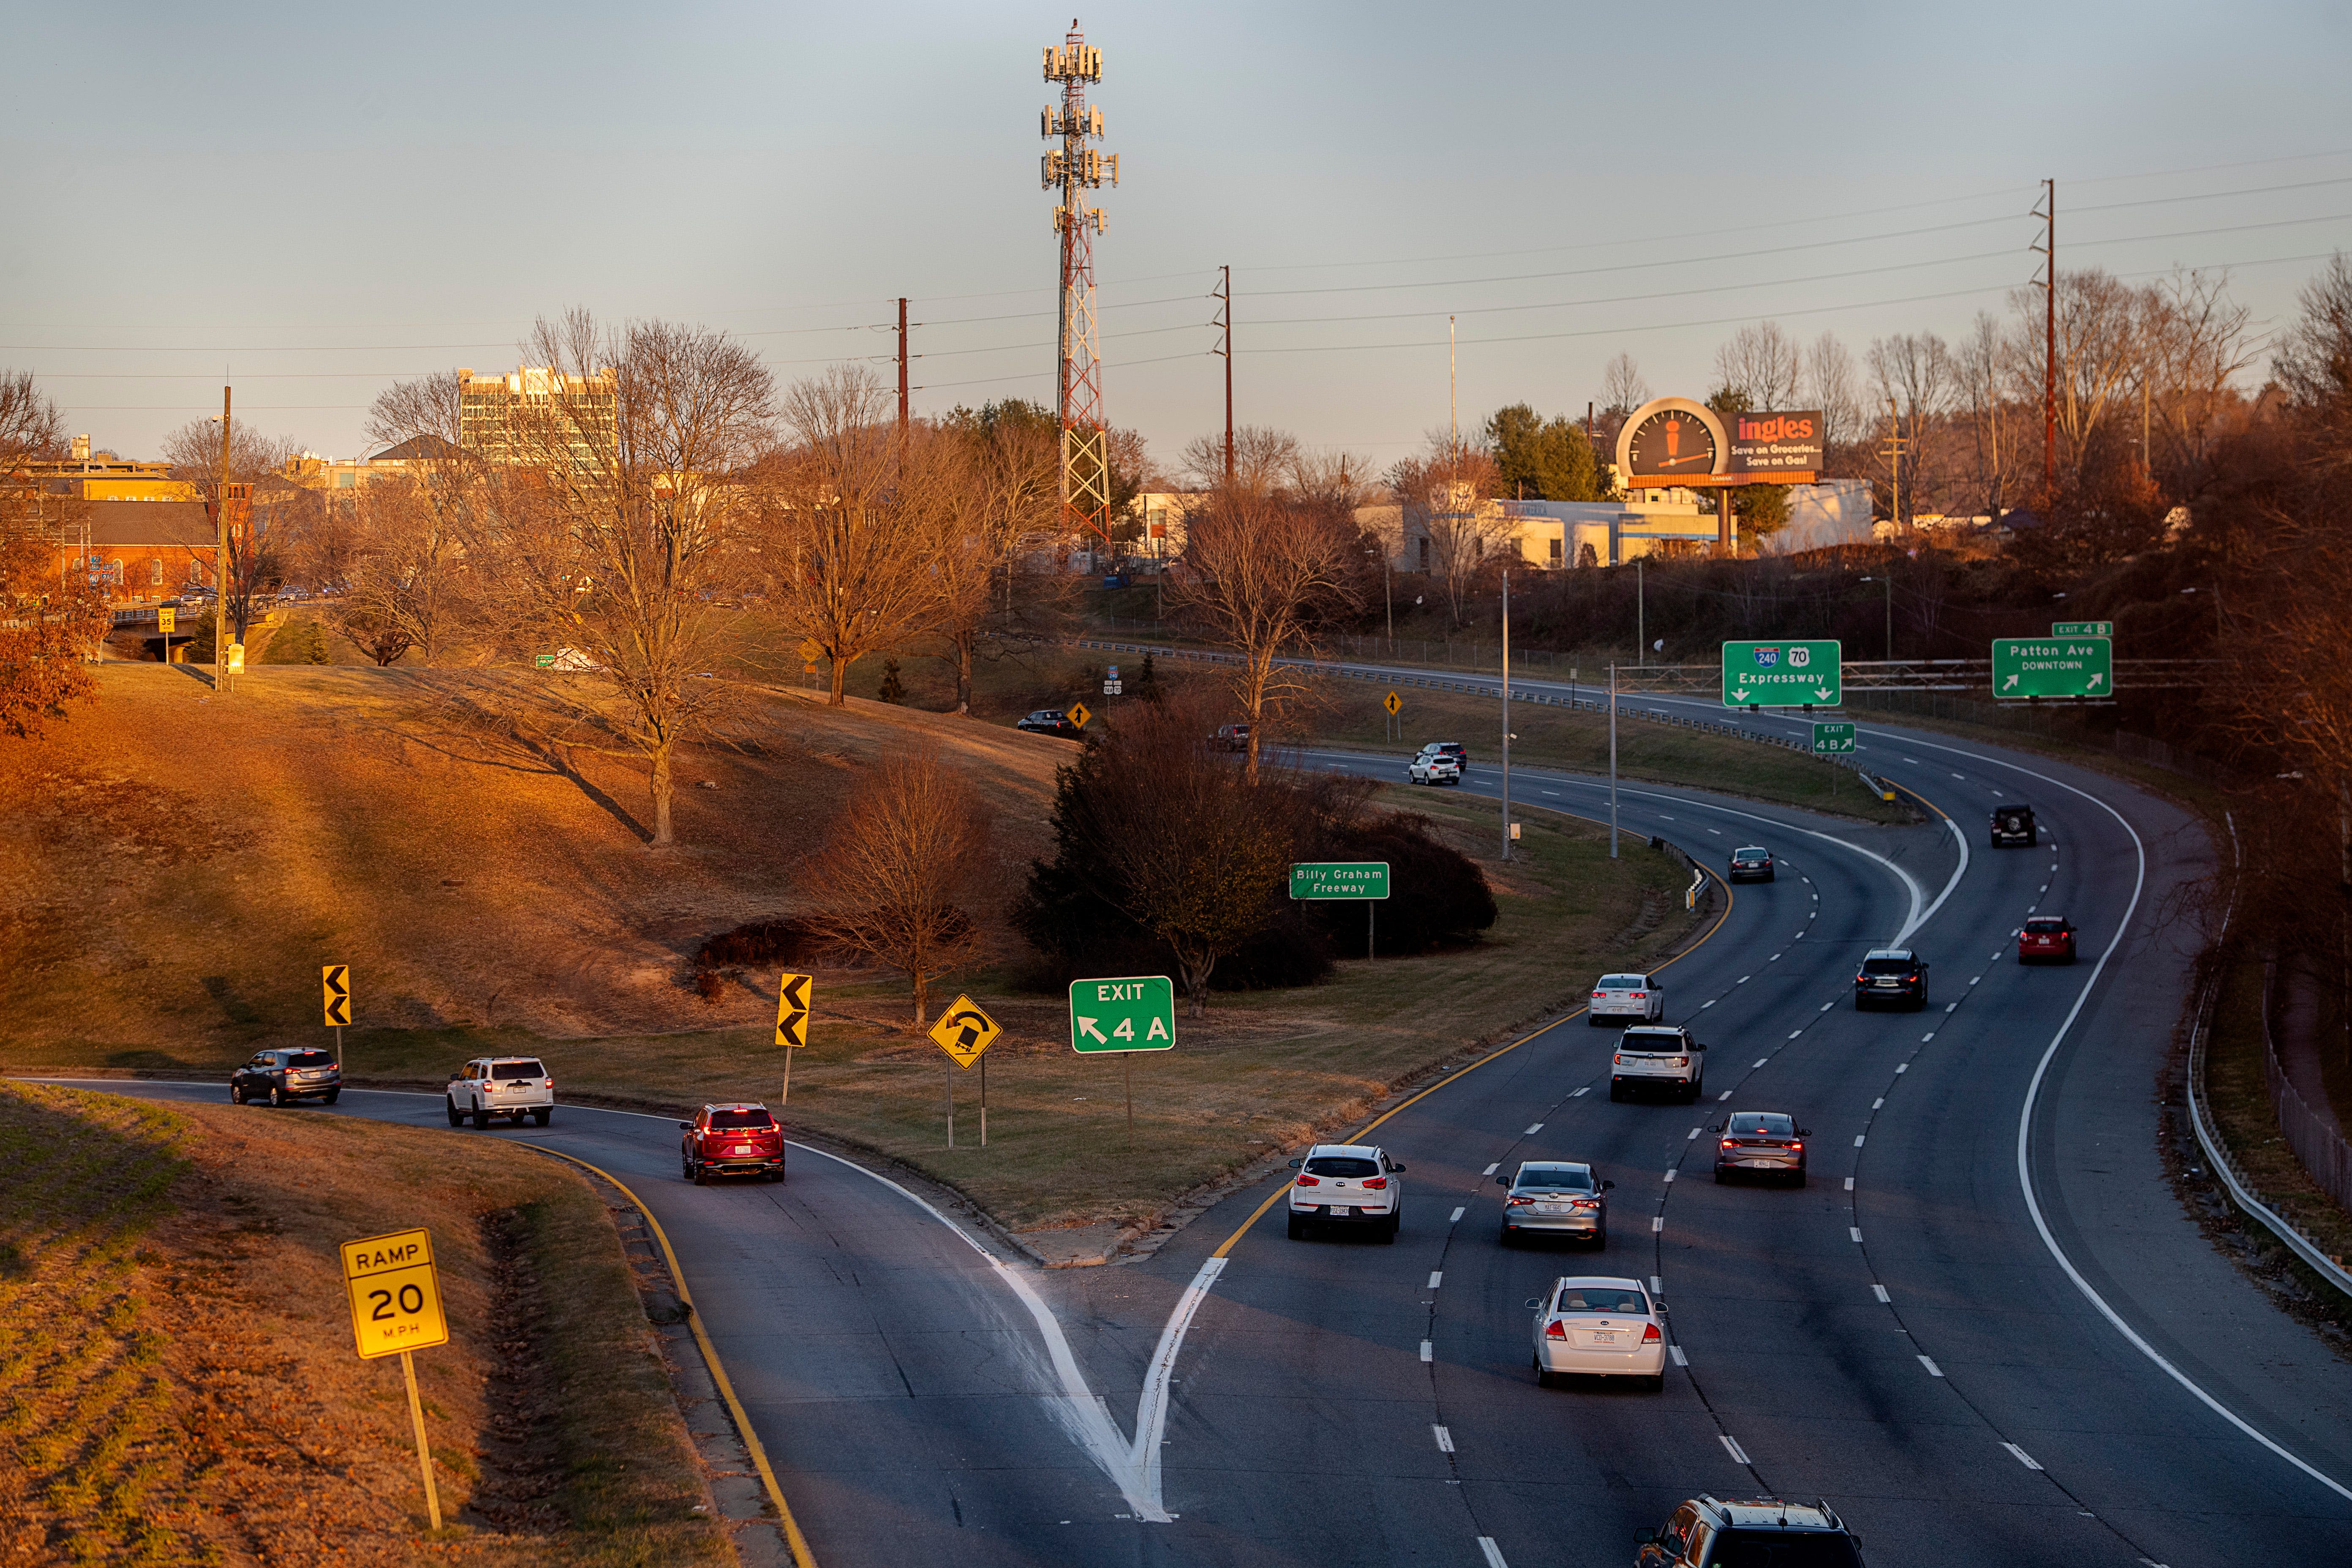 Ahead of I-26 Connector designs, Asheville hears Patton concepts: Road diet, roundabouts